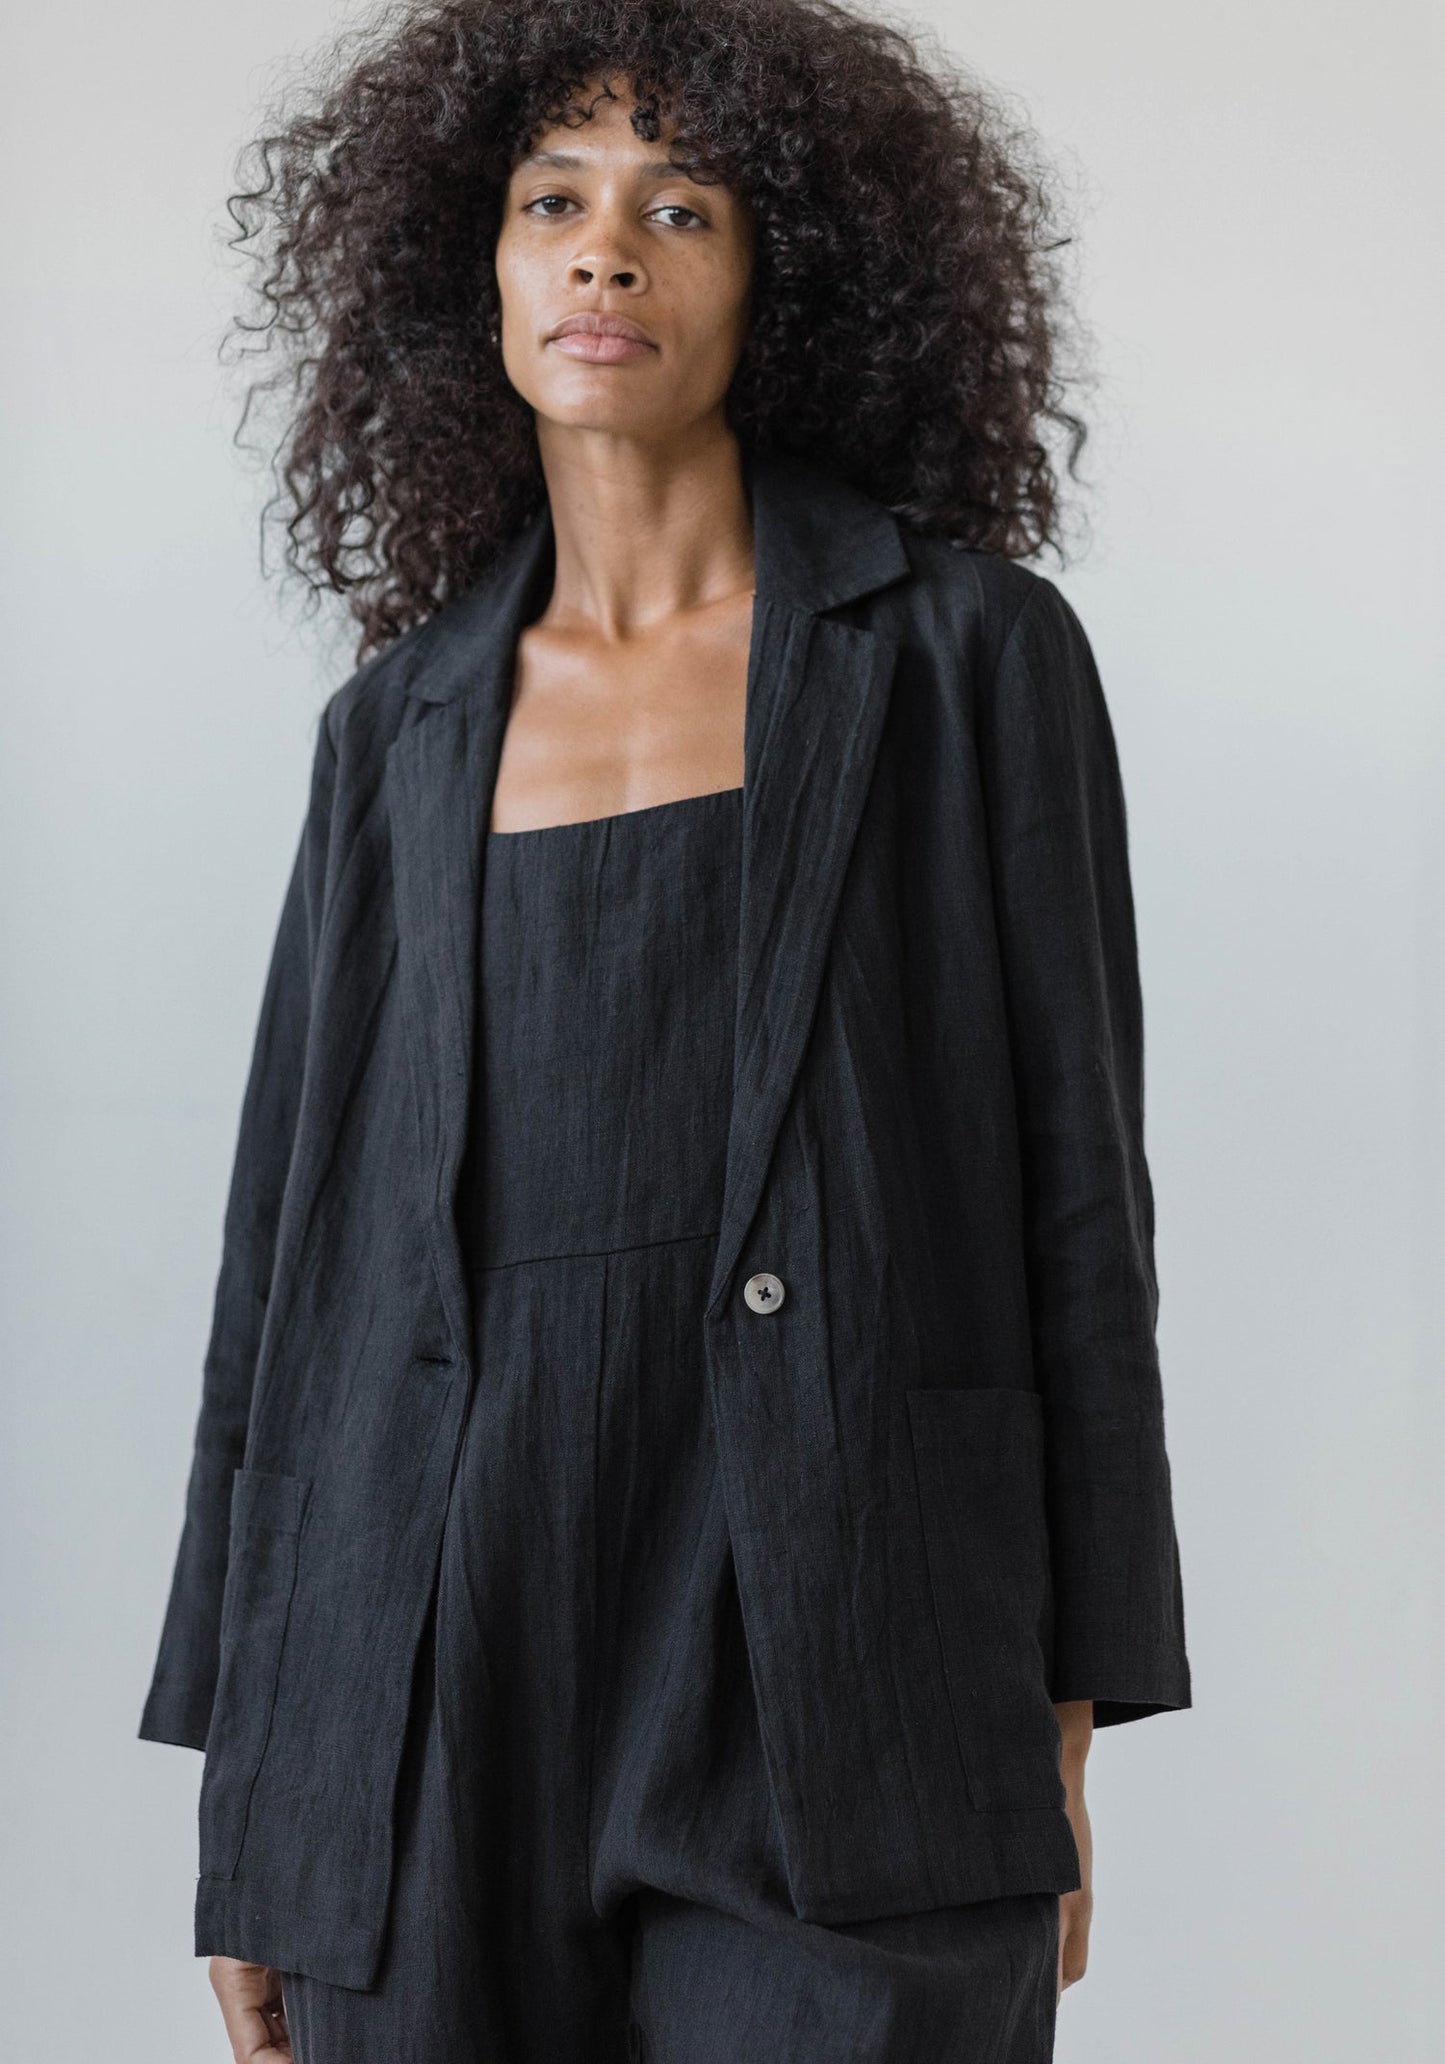 The First Rite Everyday Blazer is the perfect -throw over anything- layer to pull a look together with a touch of sophistication. Styled with two front pockets and closes with a single corozo button.